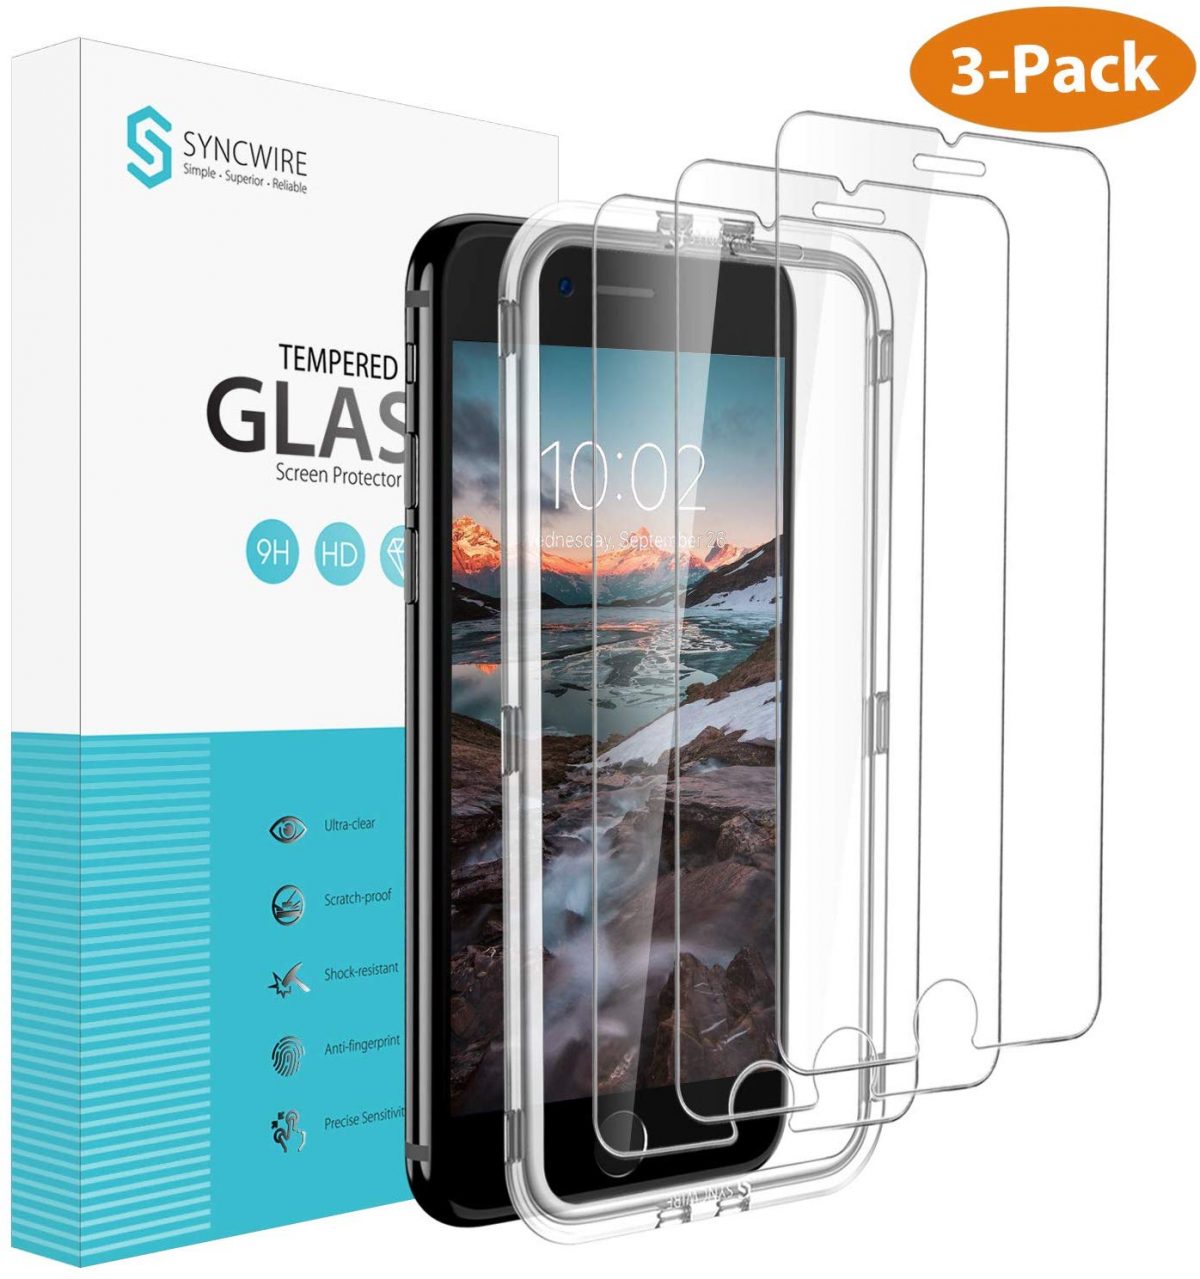 15 Best Screen Protectors for Mobile Phones (2020 Edition)